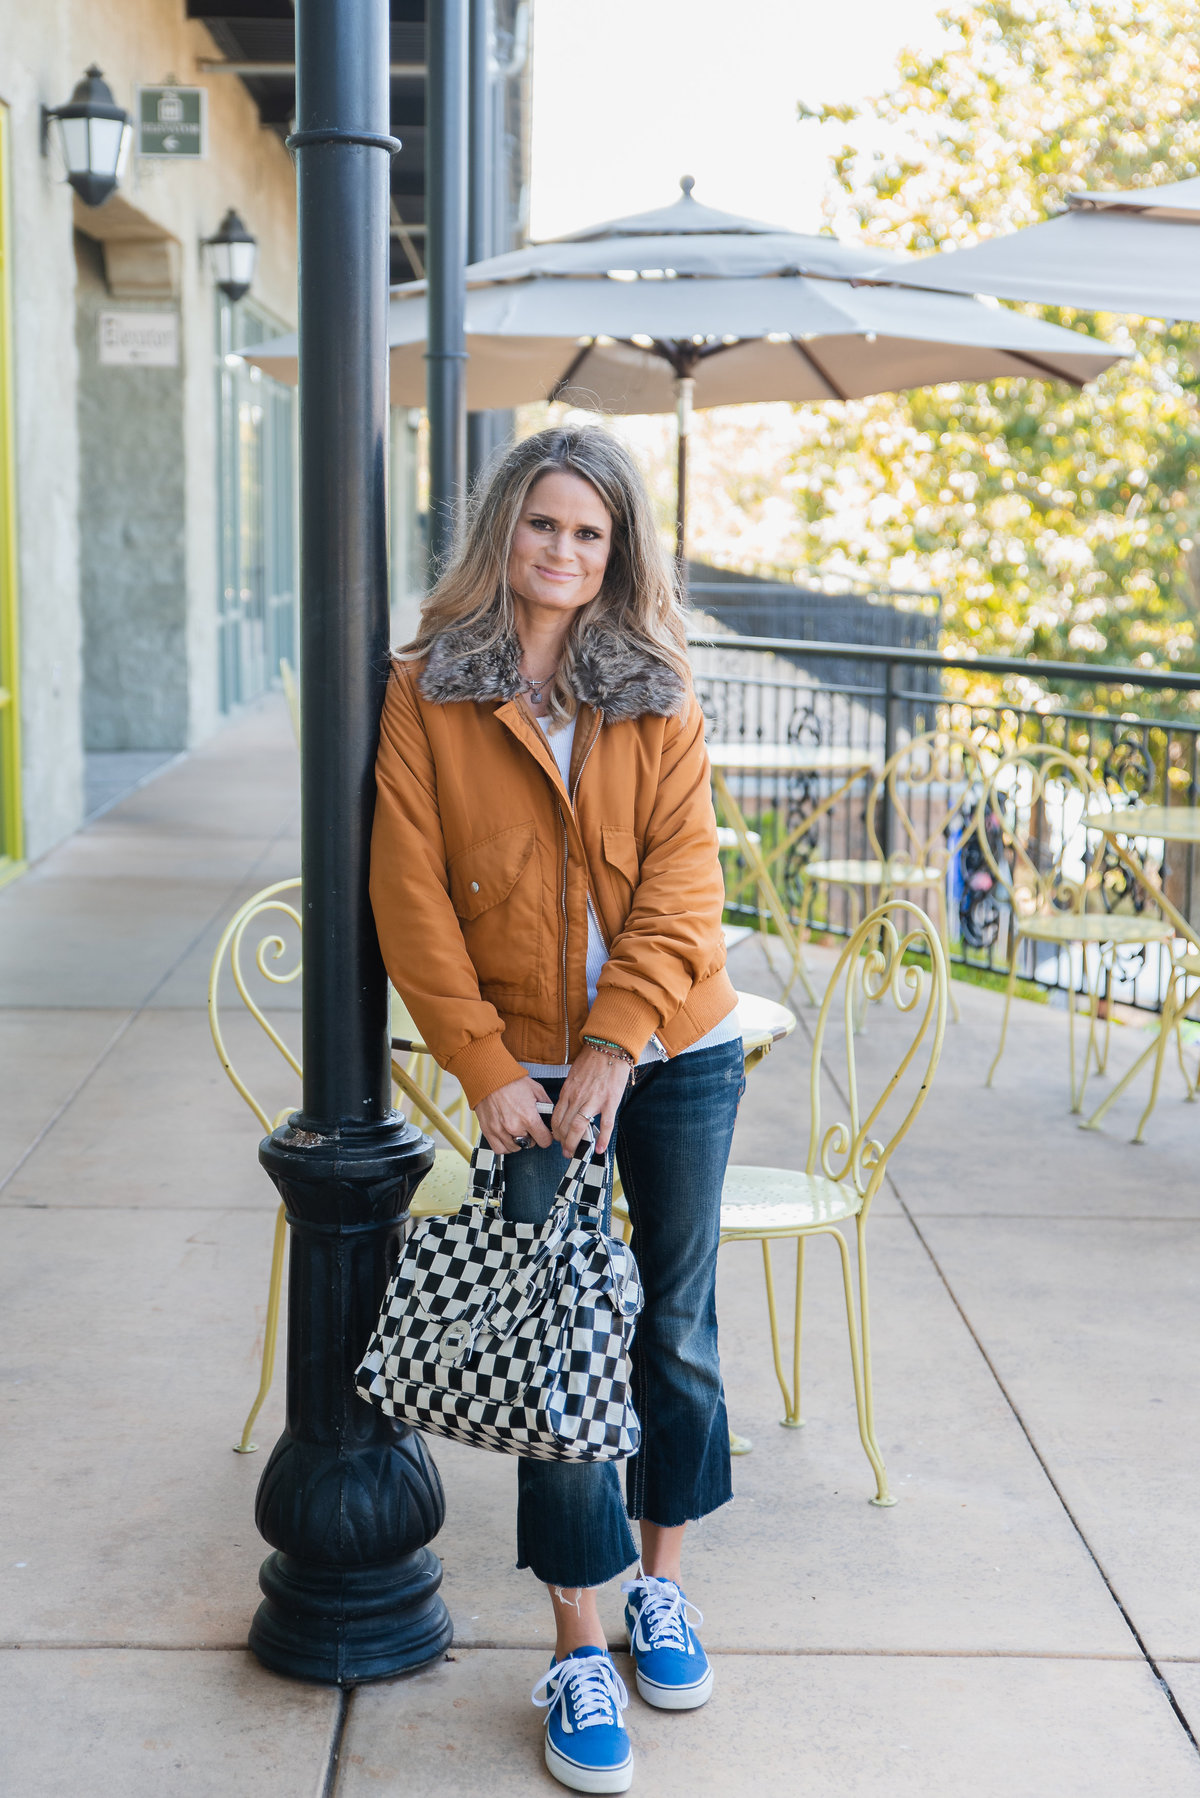 woman leaning against pole on cafe patio holding checkered bag